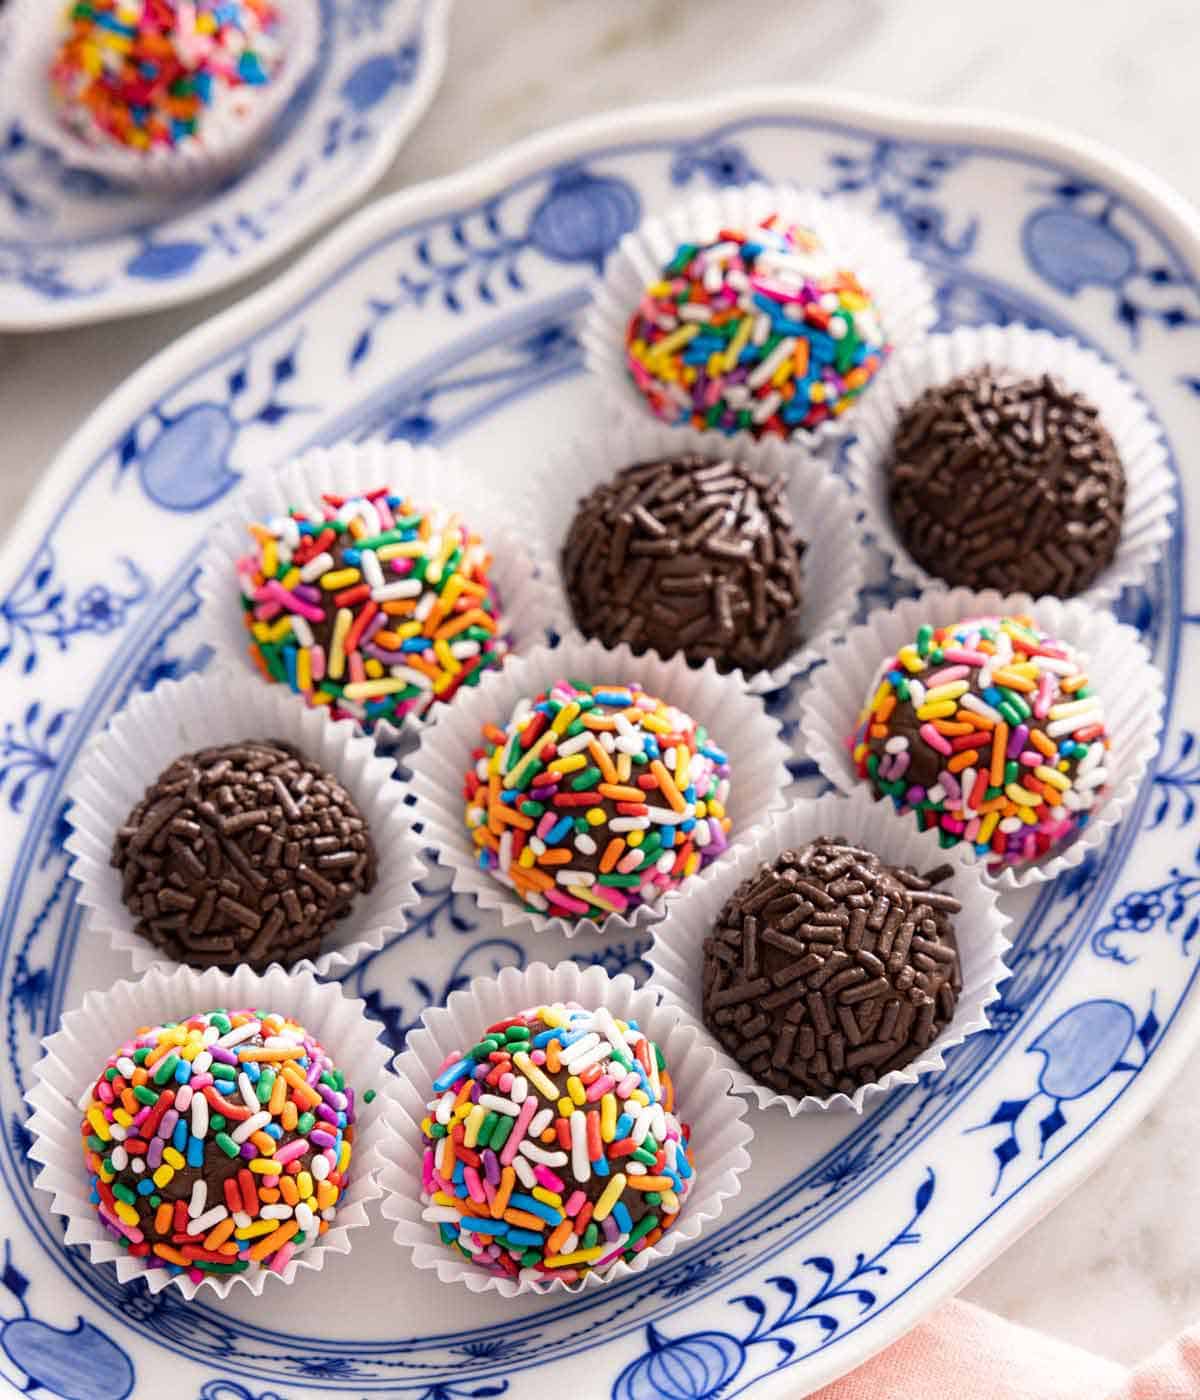 A platter of brigadeiros with assorted sprinkles coating them.